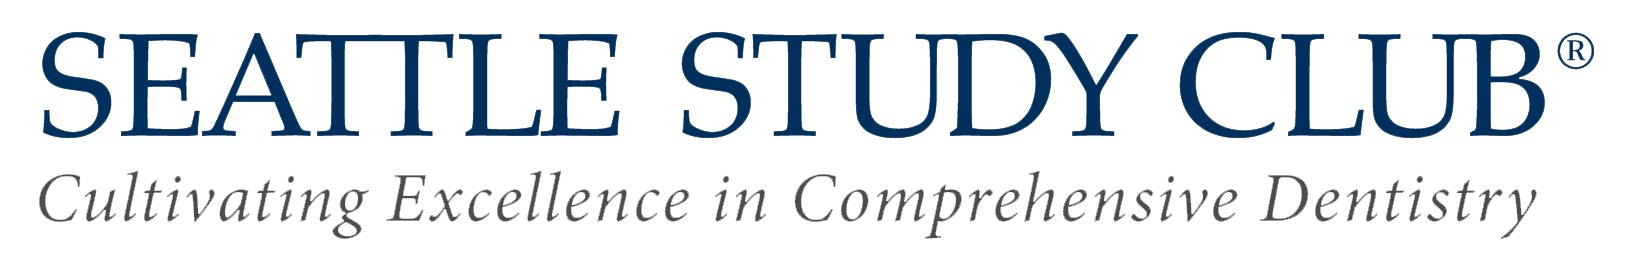 logo-in_the_news-seattle_study_club